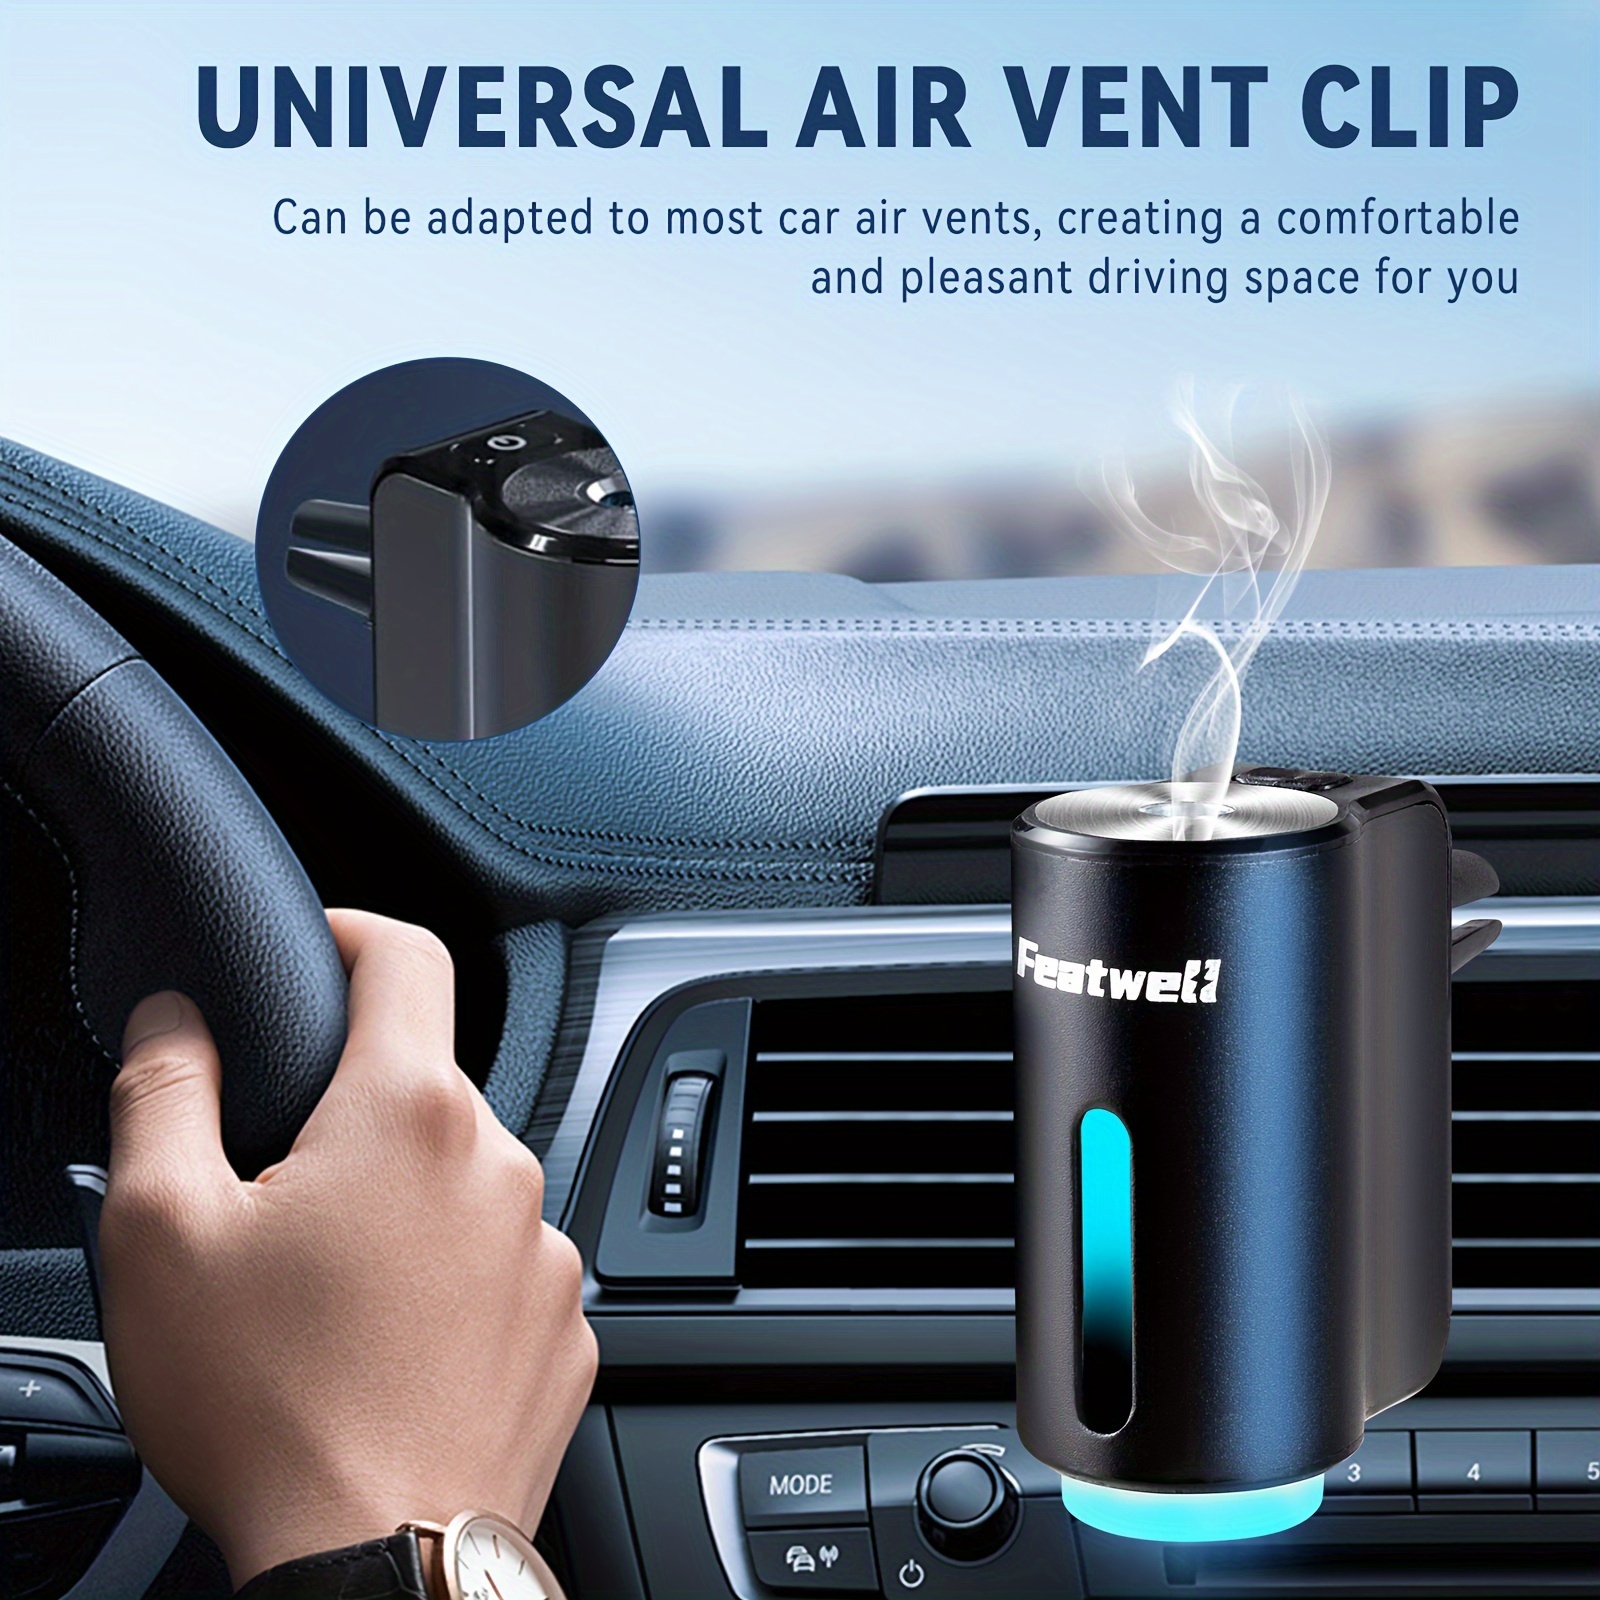 

2pcs Smart Car Air Aromatherapy Diffuser, Fragrance Car Air Fresheners With 3 Adjustable, Humidifier Essential Oil Diffuser For Vehicle